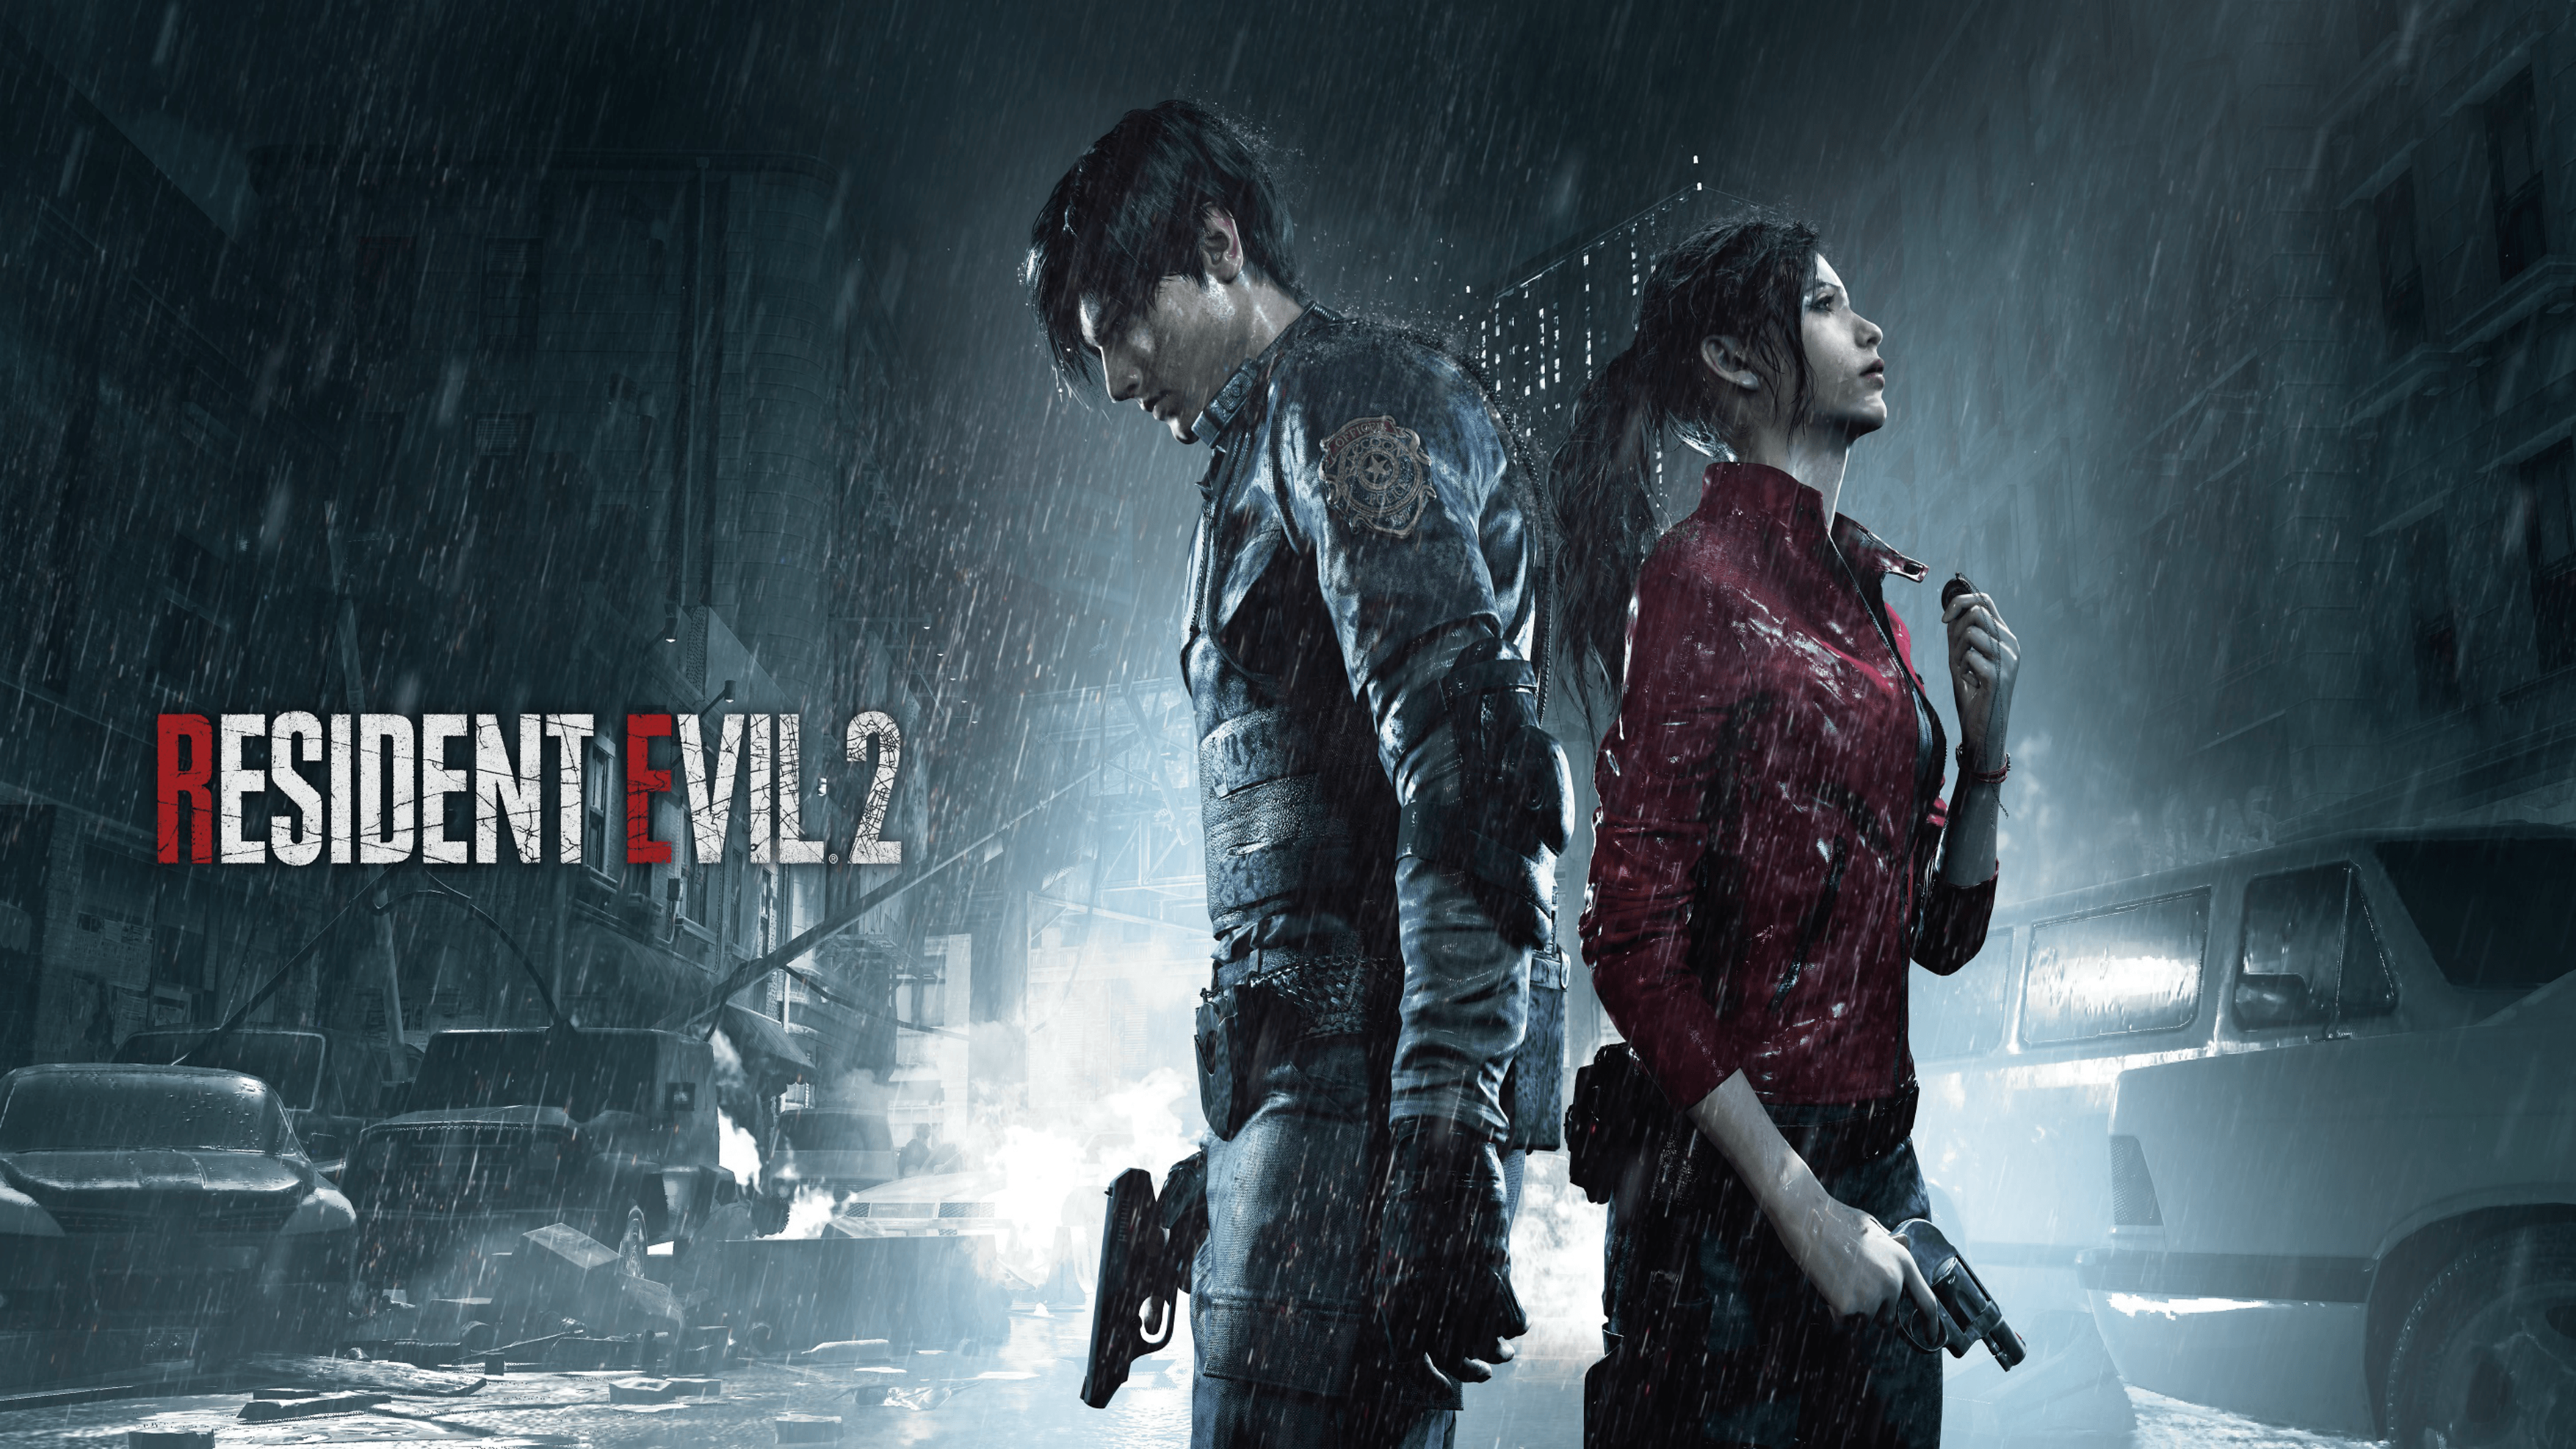 Resident Evil 2 2018 Leon & Claire 4k Ultra HD